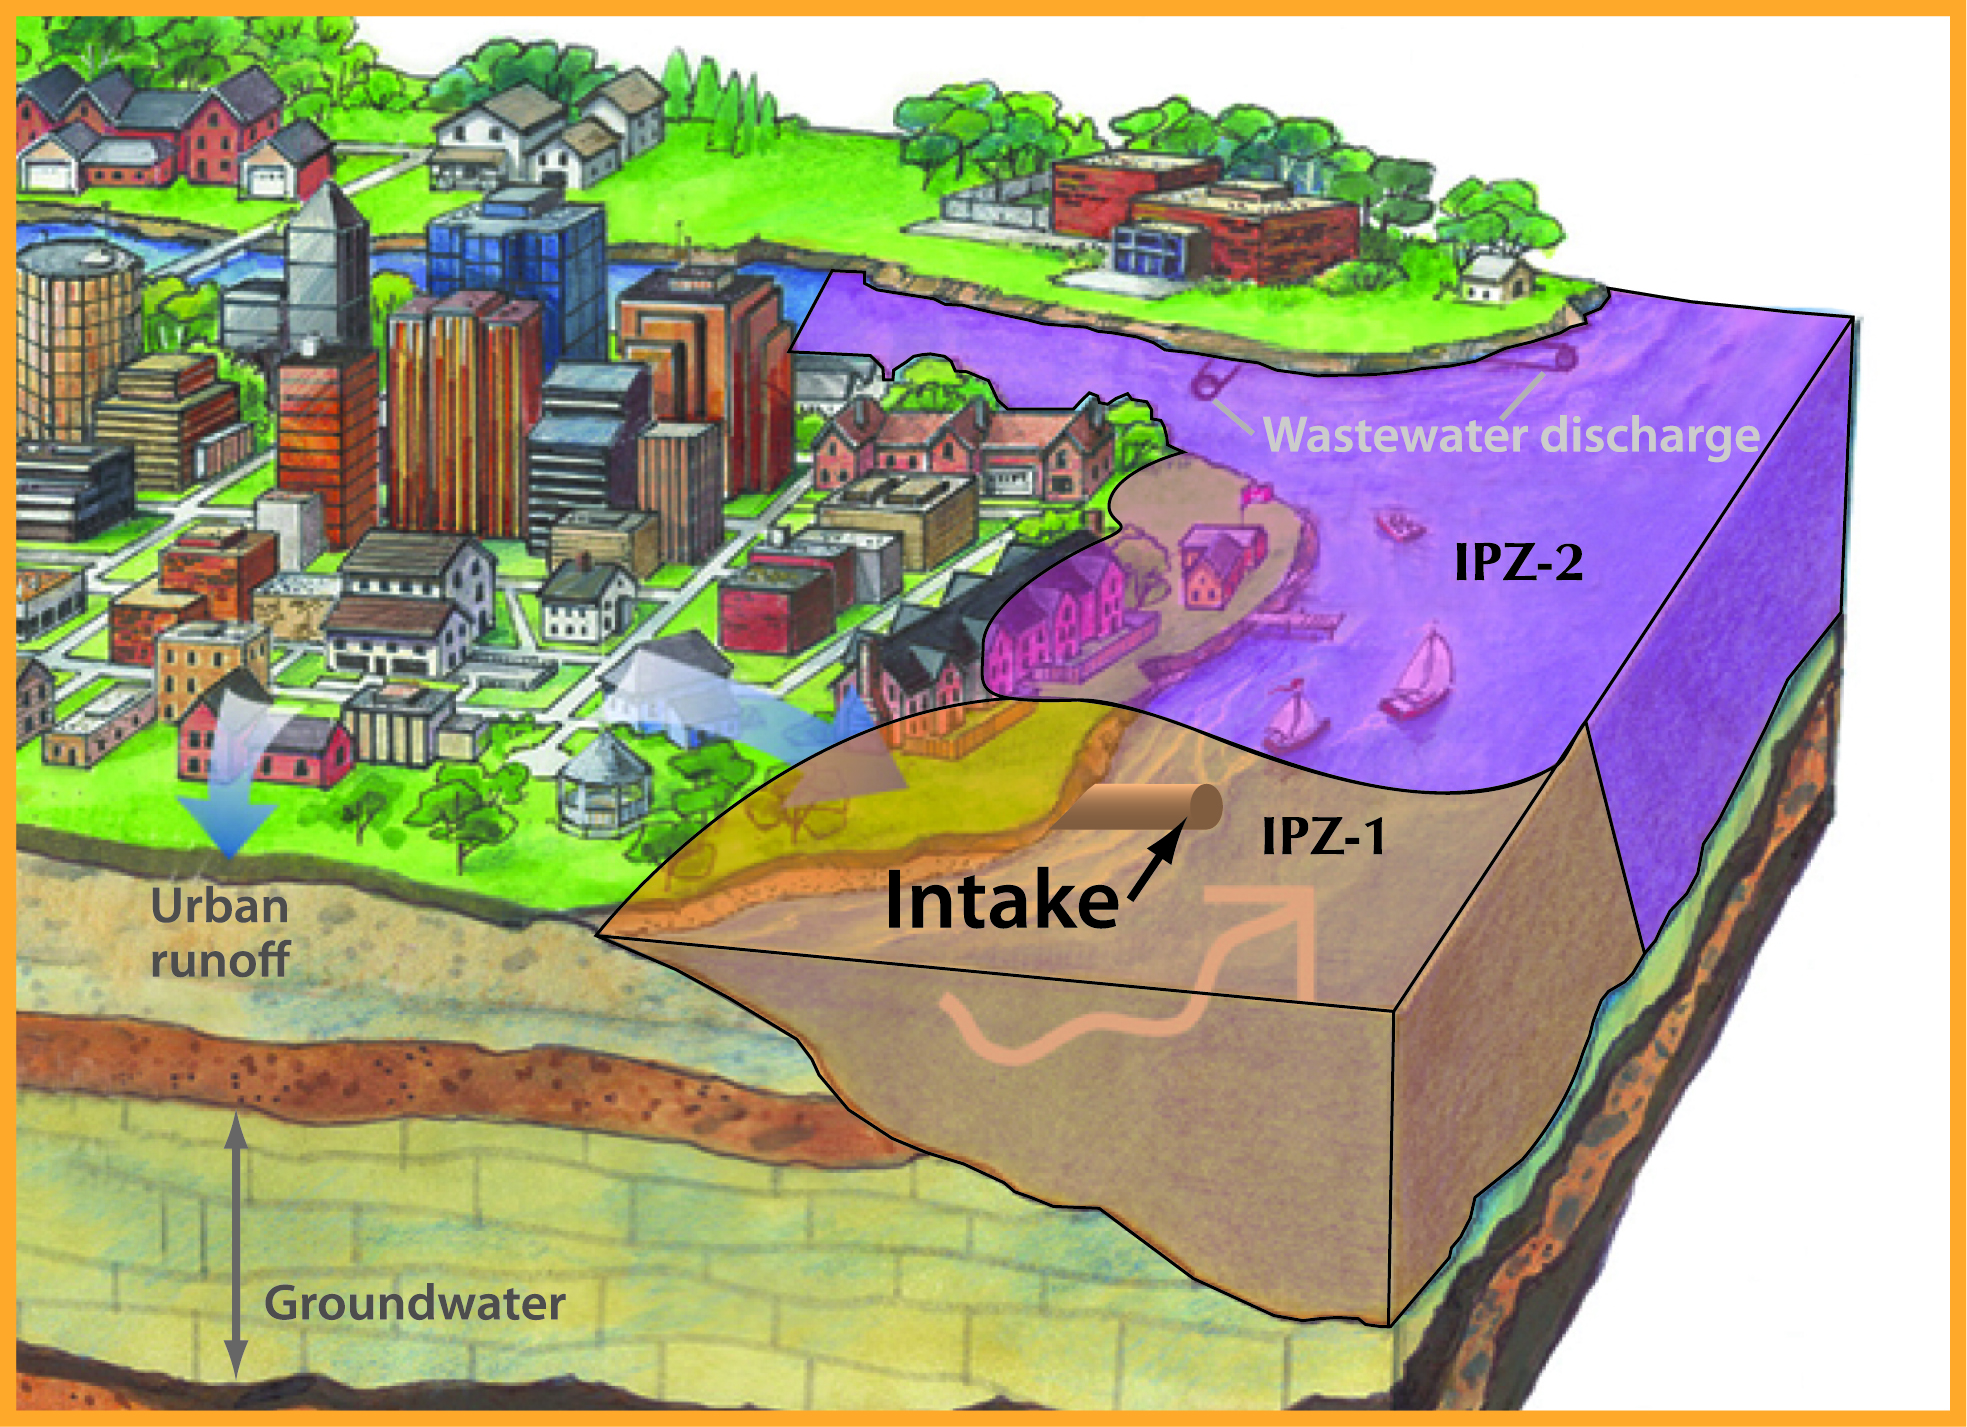 The area of water and land within an intake protection zone is determined by a variety of factors such as the amount of time it would take any material spilled in or near the river to flow downstream to the water intake. This is called the time of travel. A fast or slow flowing river can change the area of an intake protection zone significantly. River flows, streams feeding into the river or lake, and the location of municipal storm sewers or rural drains are all considered when determining an intake protection zone since they all affect time of travel.